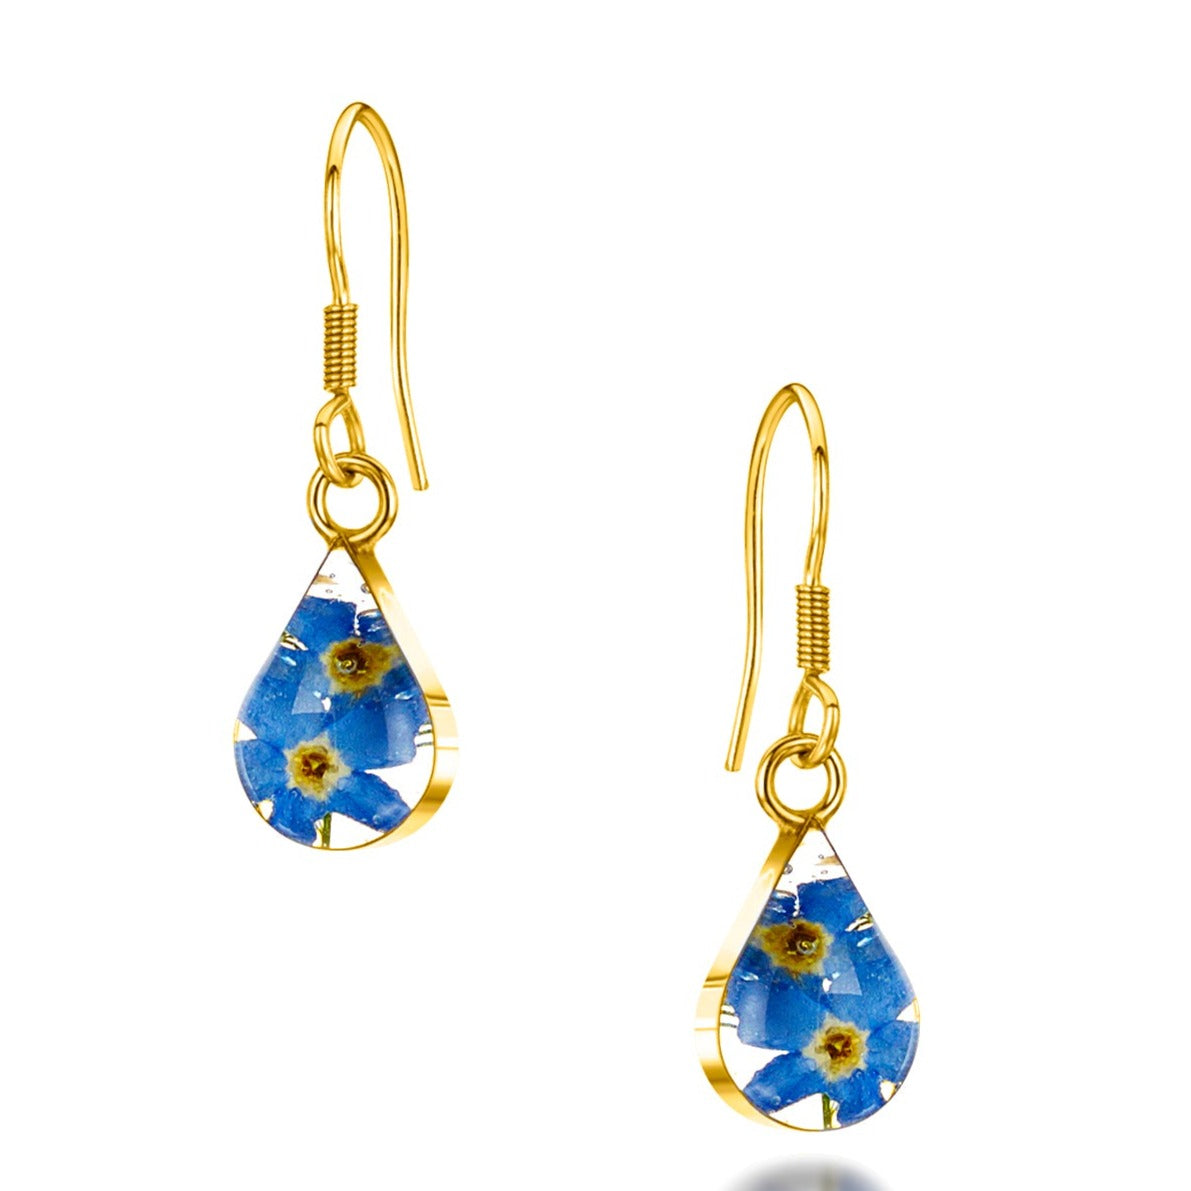 Forget-me-not gold-plated teardrop earrings - Alzheimer's Society